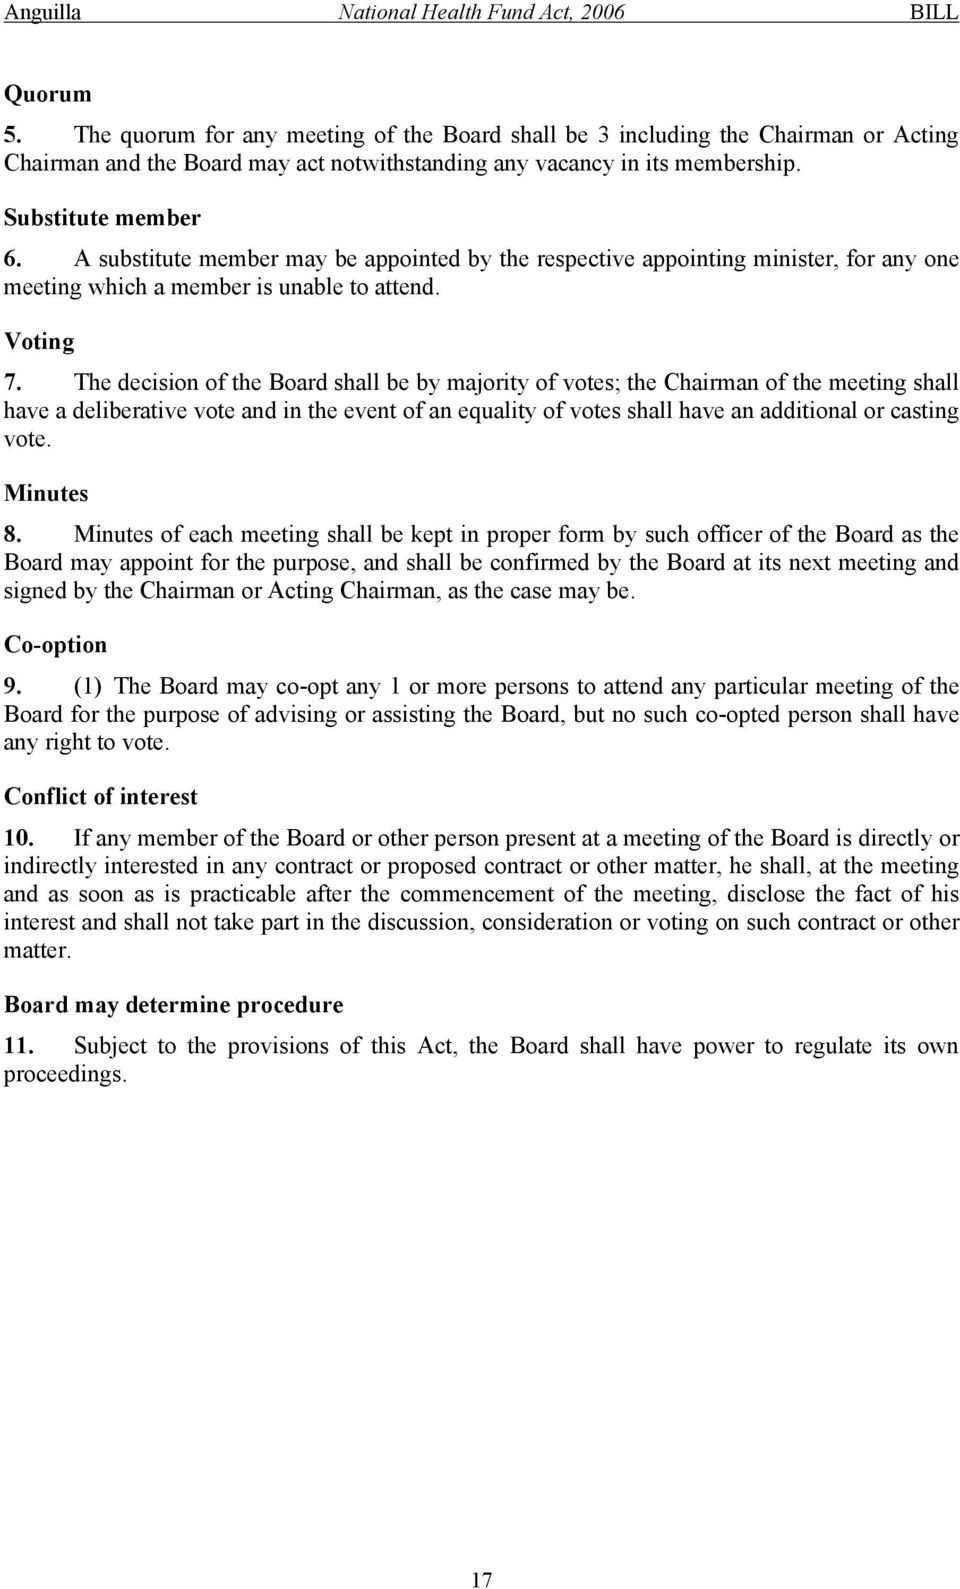 The decision of the Board shall be by majority of votes; the Chairman of the meeting shall have a deliberative vote and in the event of an equality of votes shall have an additional or casting vote.